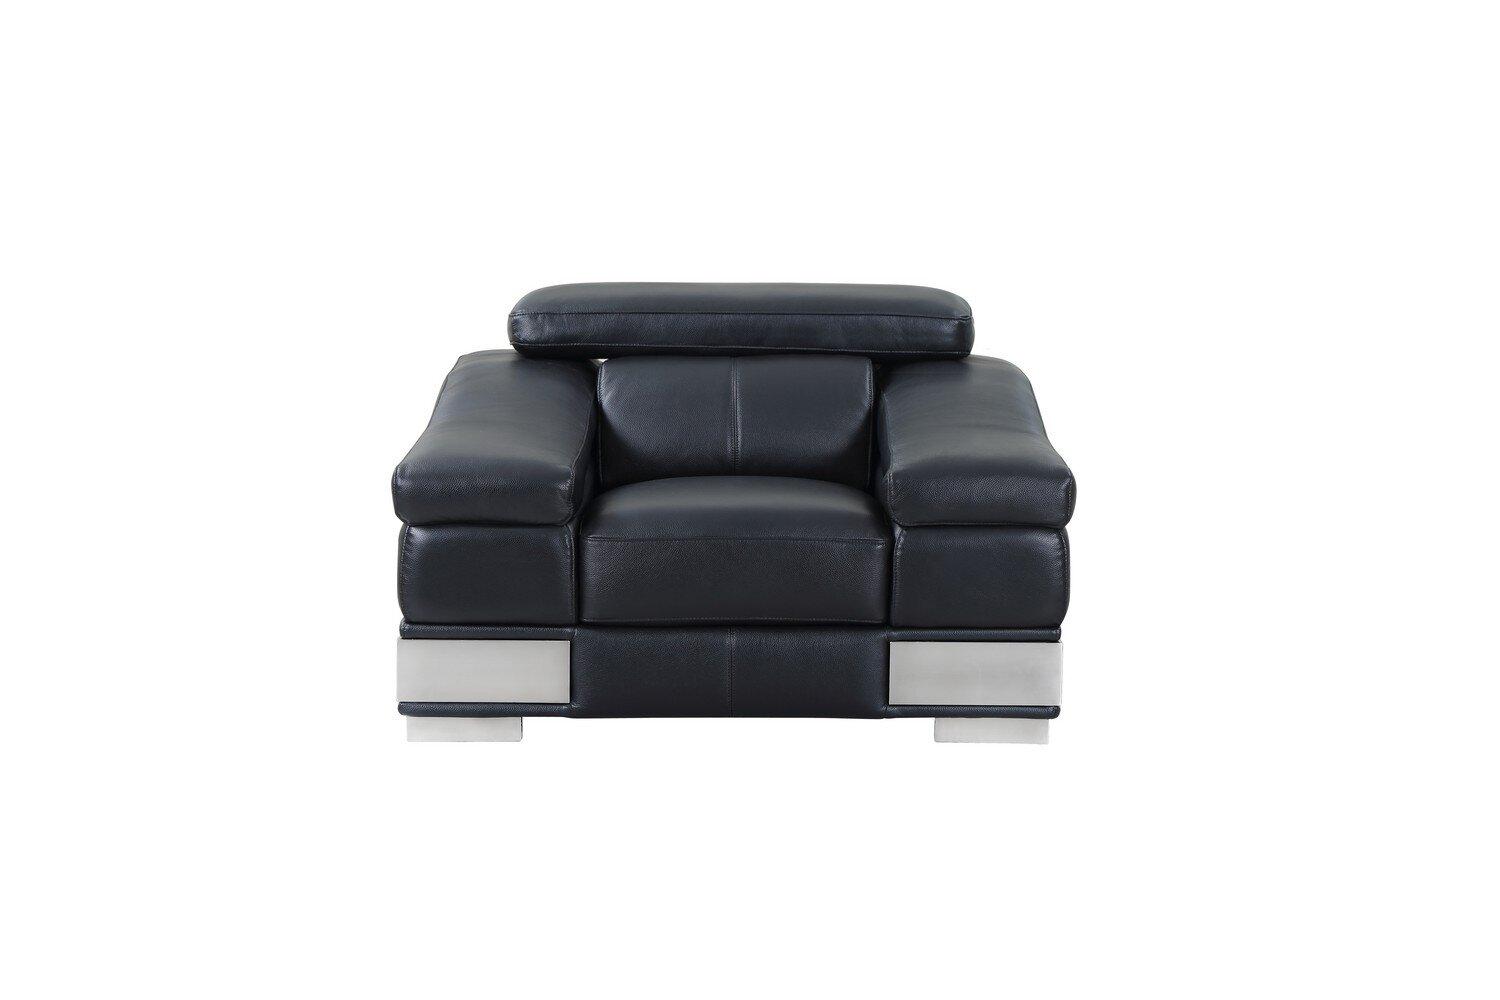 Contemporary Arm Chairs 415 SKU: ORNL4837 in Black Genuine Leather